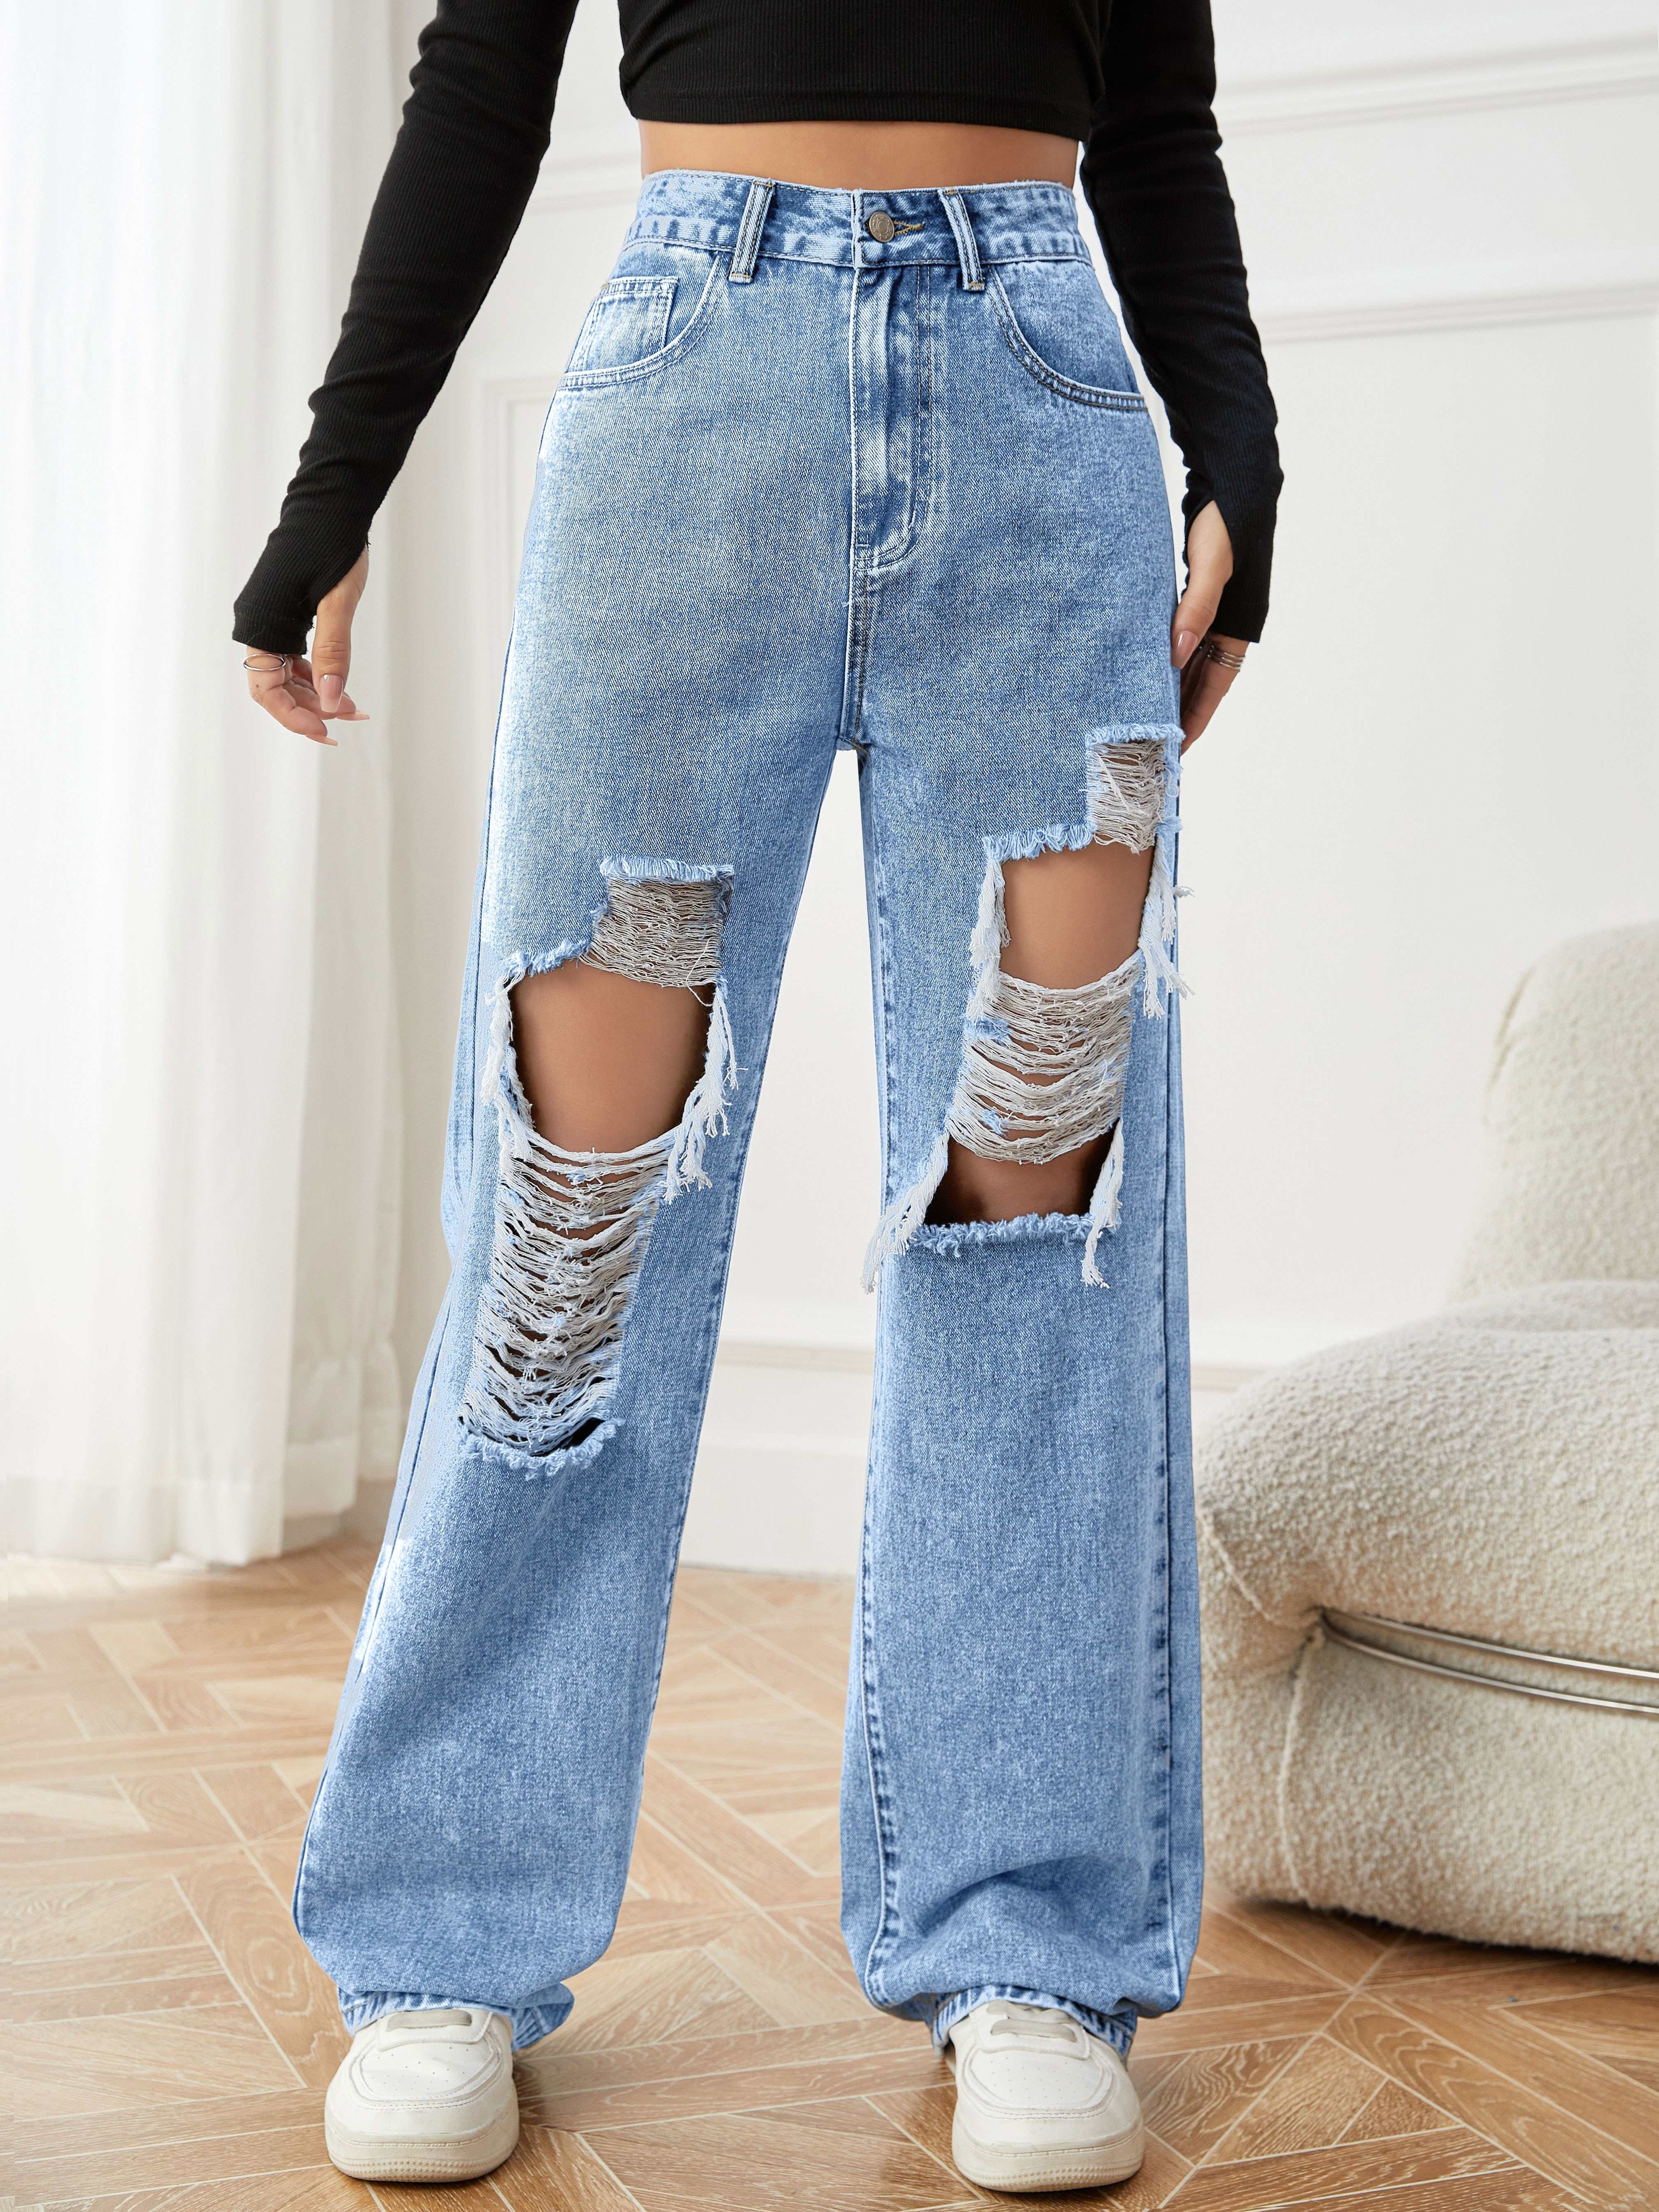 New Fashion Womens Denim Ripped Jeans Loose Straight Pants Bell